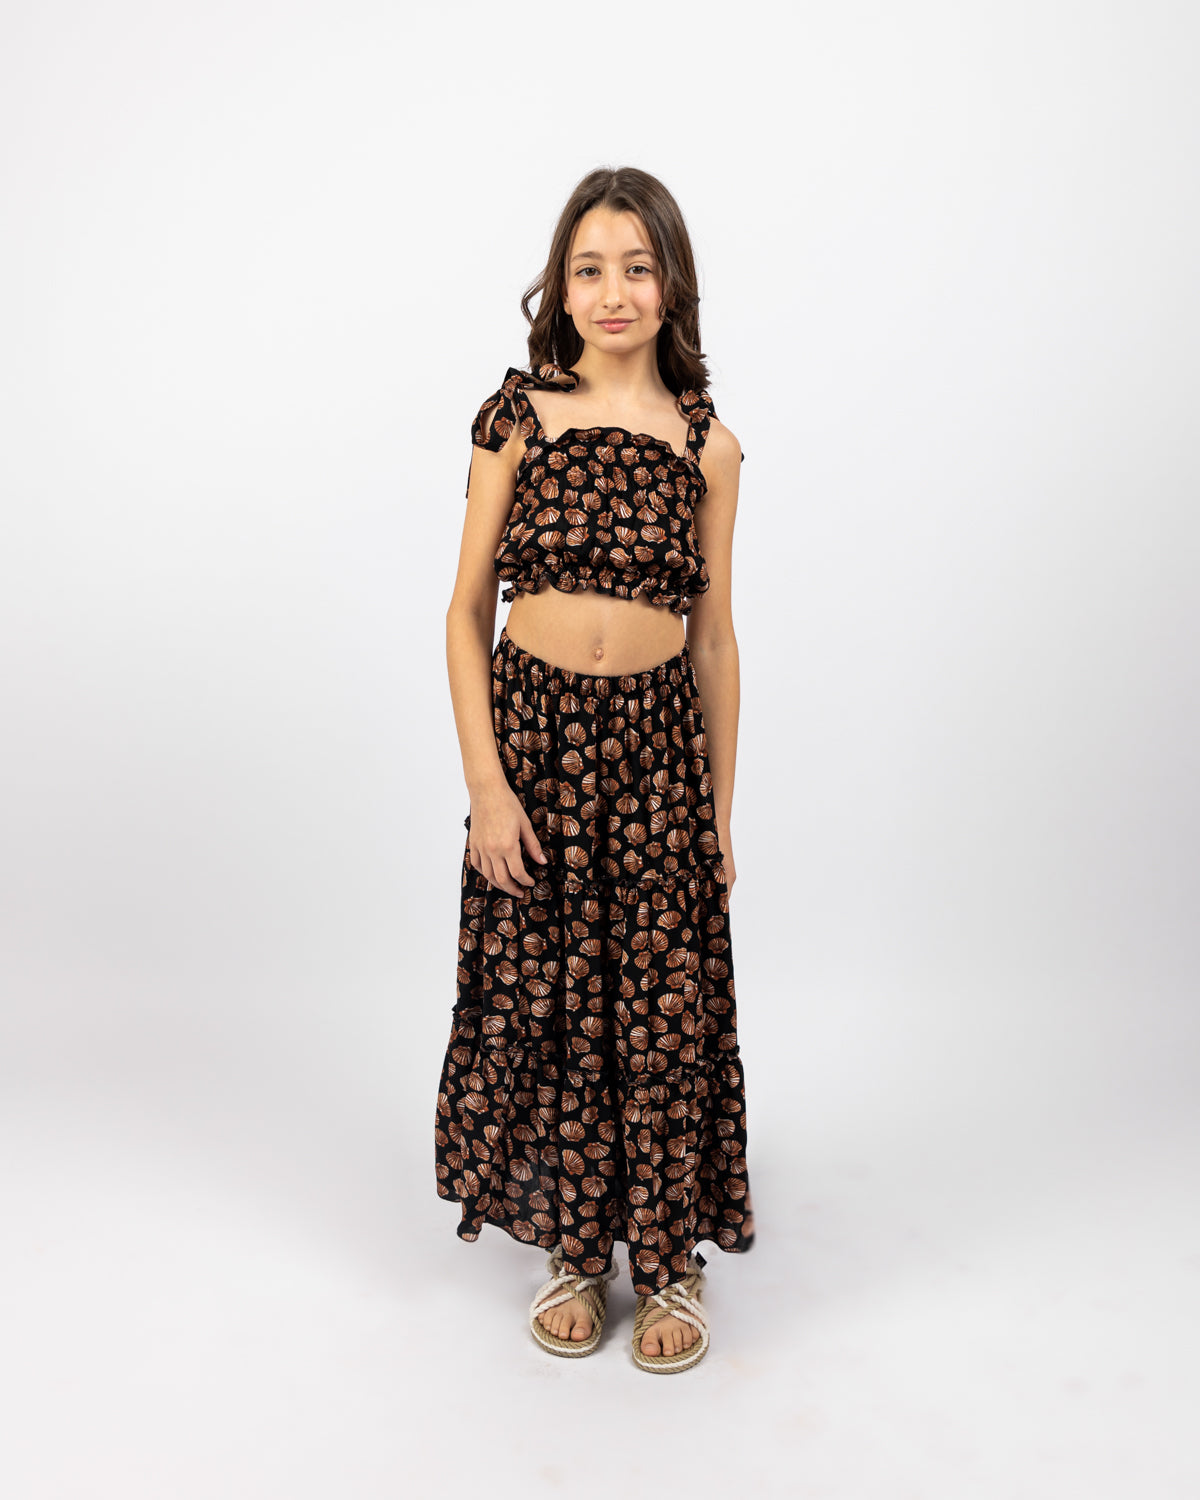 Seashell Crop Top With Matching Ruffled Skirt For Girls - Black